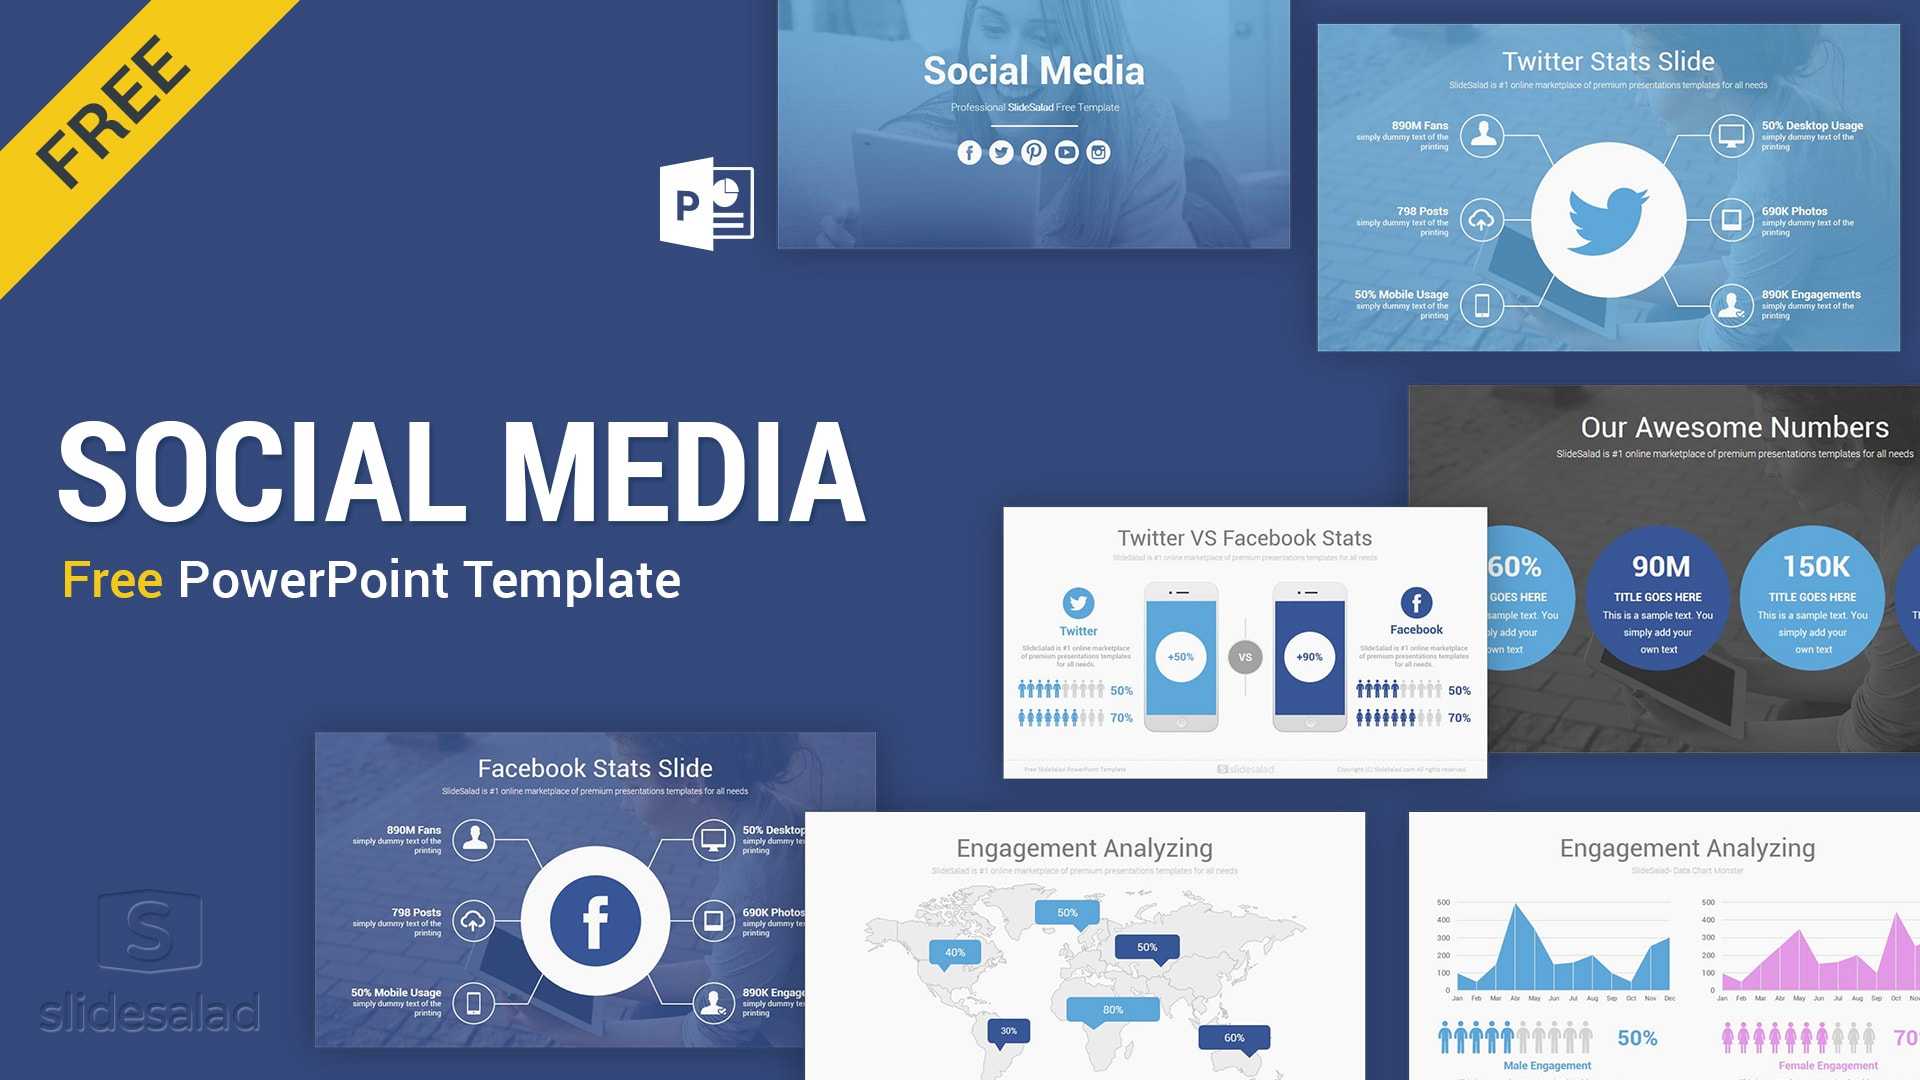 Social Media Free Powerpoint Template Ppt Slides – Slidesalad Pertaining To Powerpoint Sample Templates Free Download